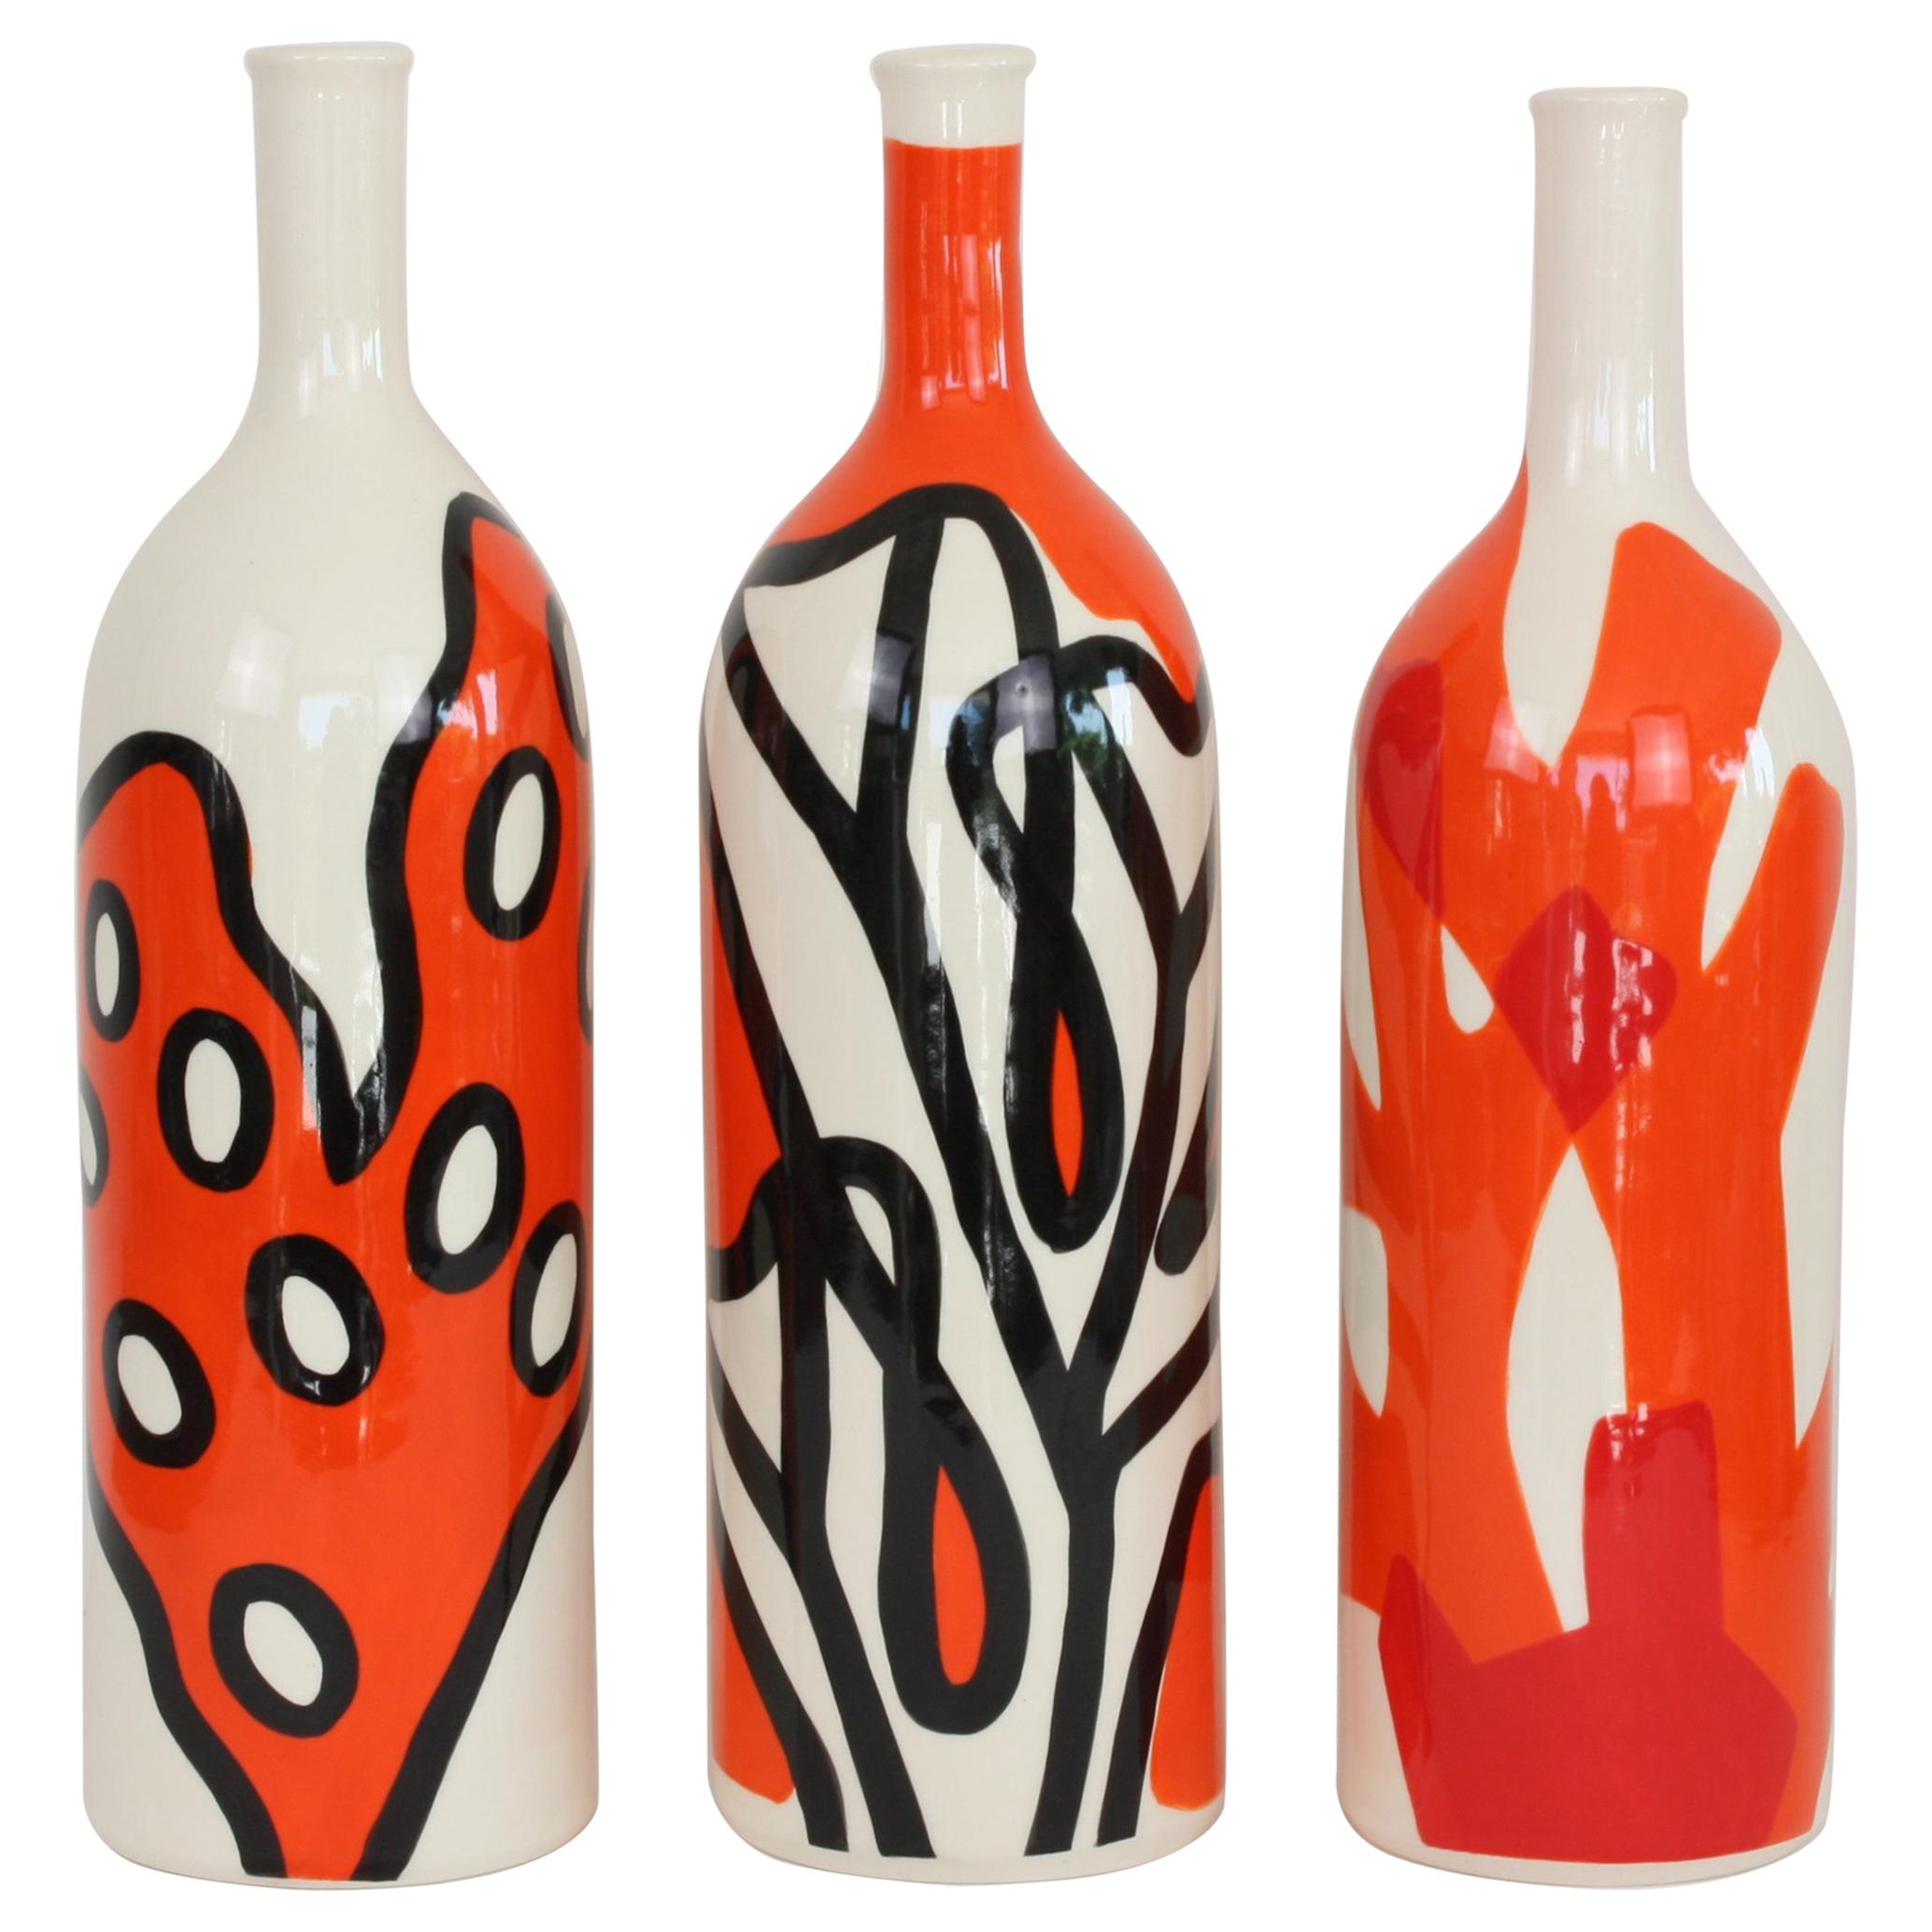 Set of 3 Contemporary Ceramic Bottles with Nautical Motifs, Corail